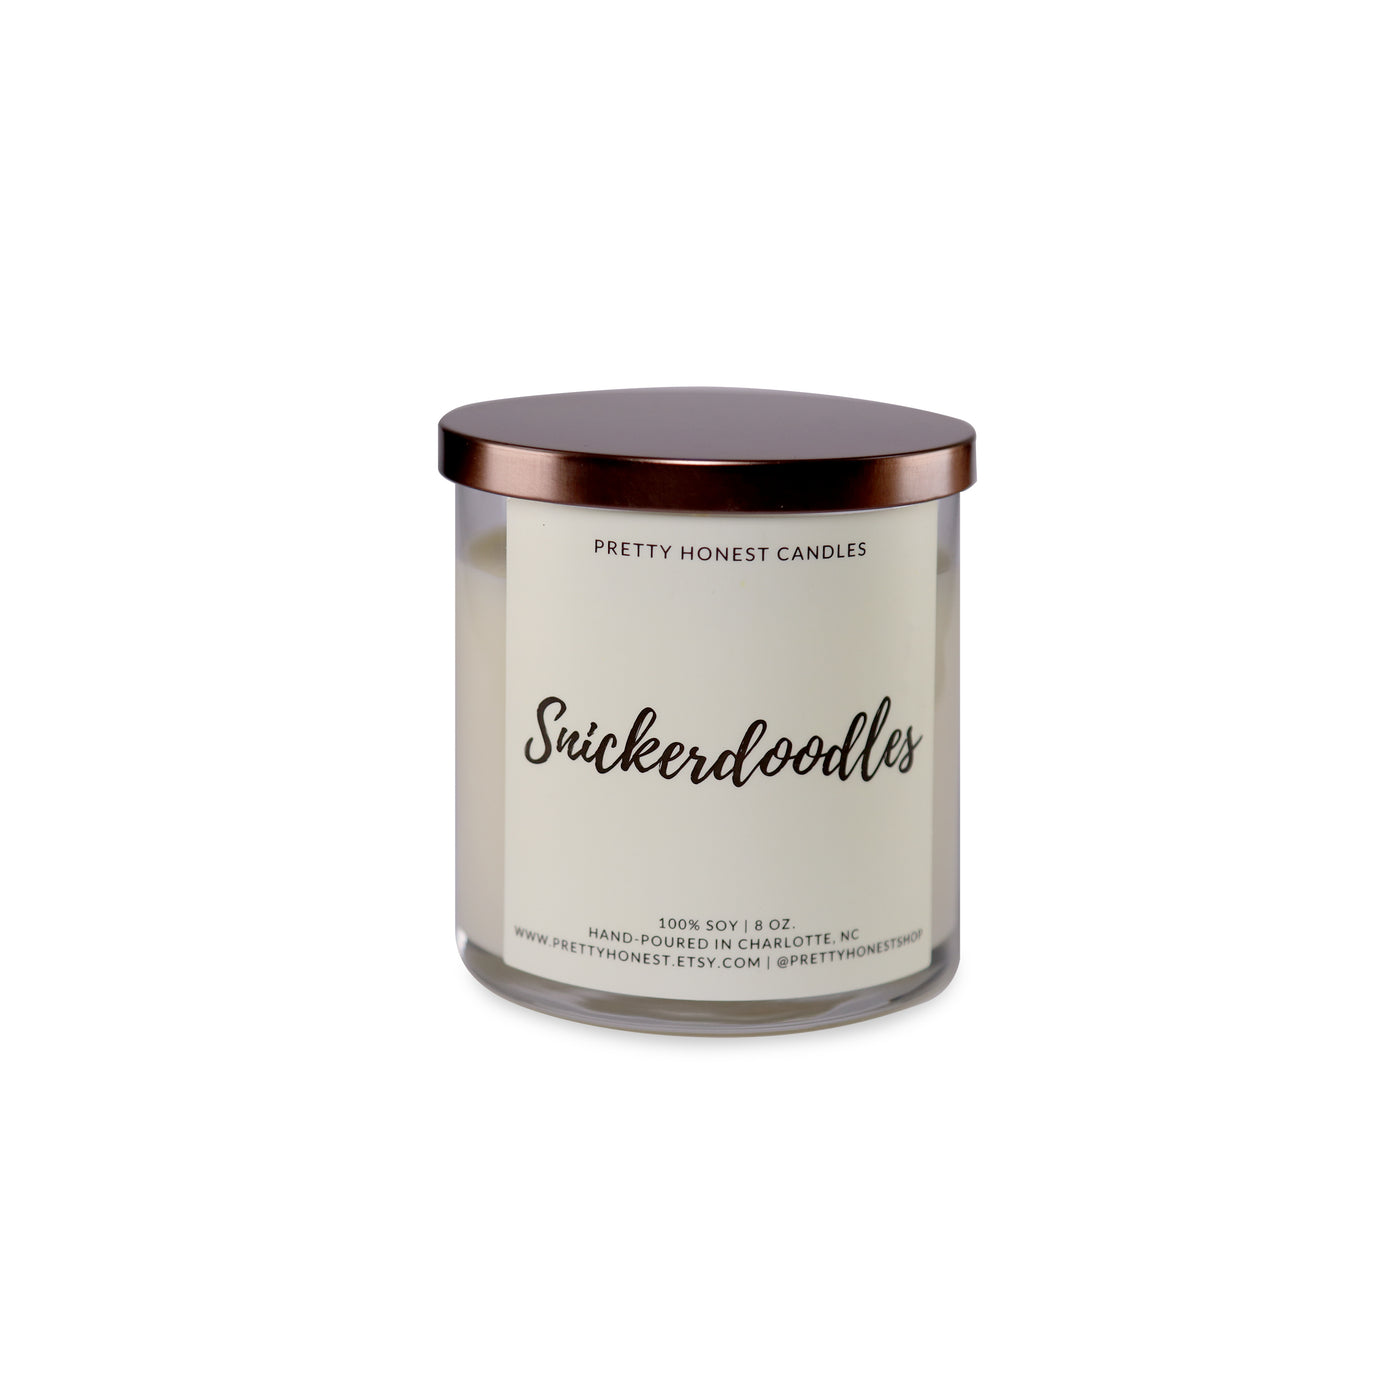 Snickerdoodles Soy Candle - LIMITED RUN